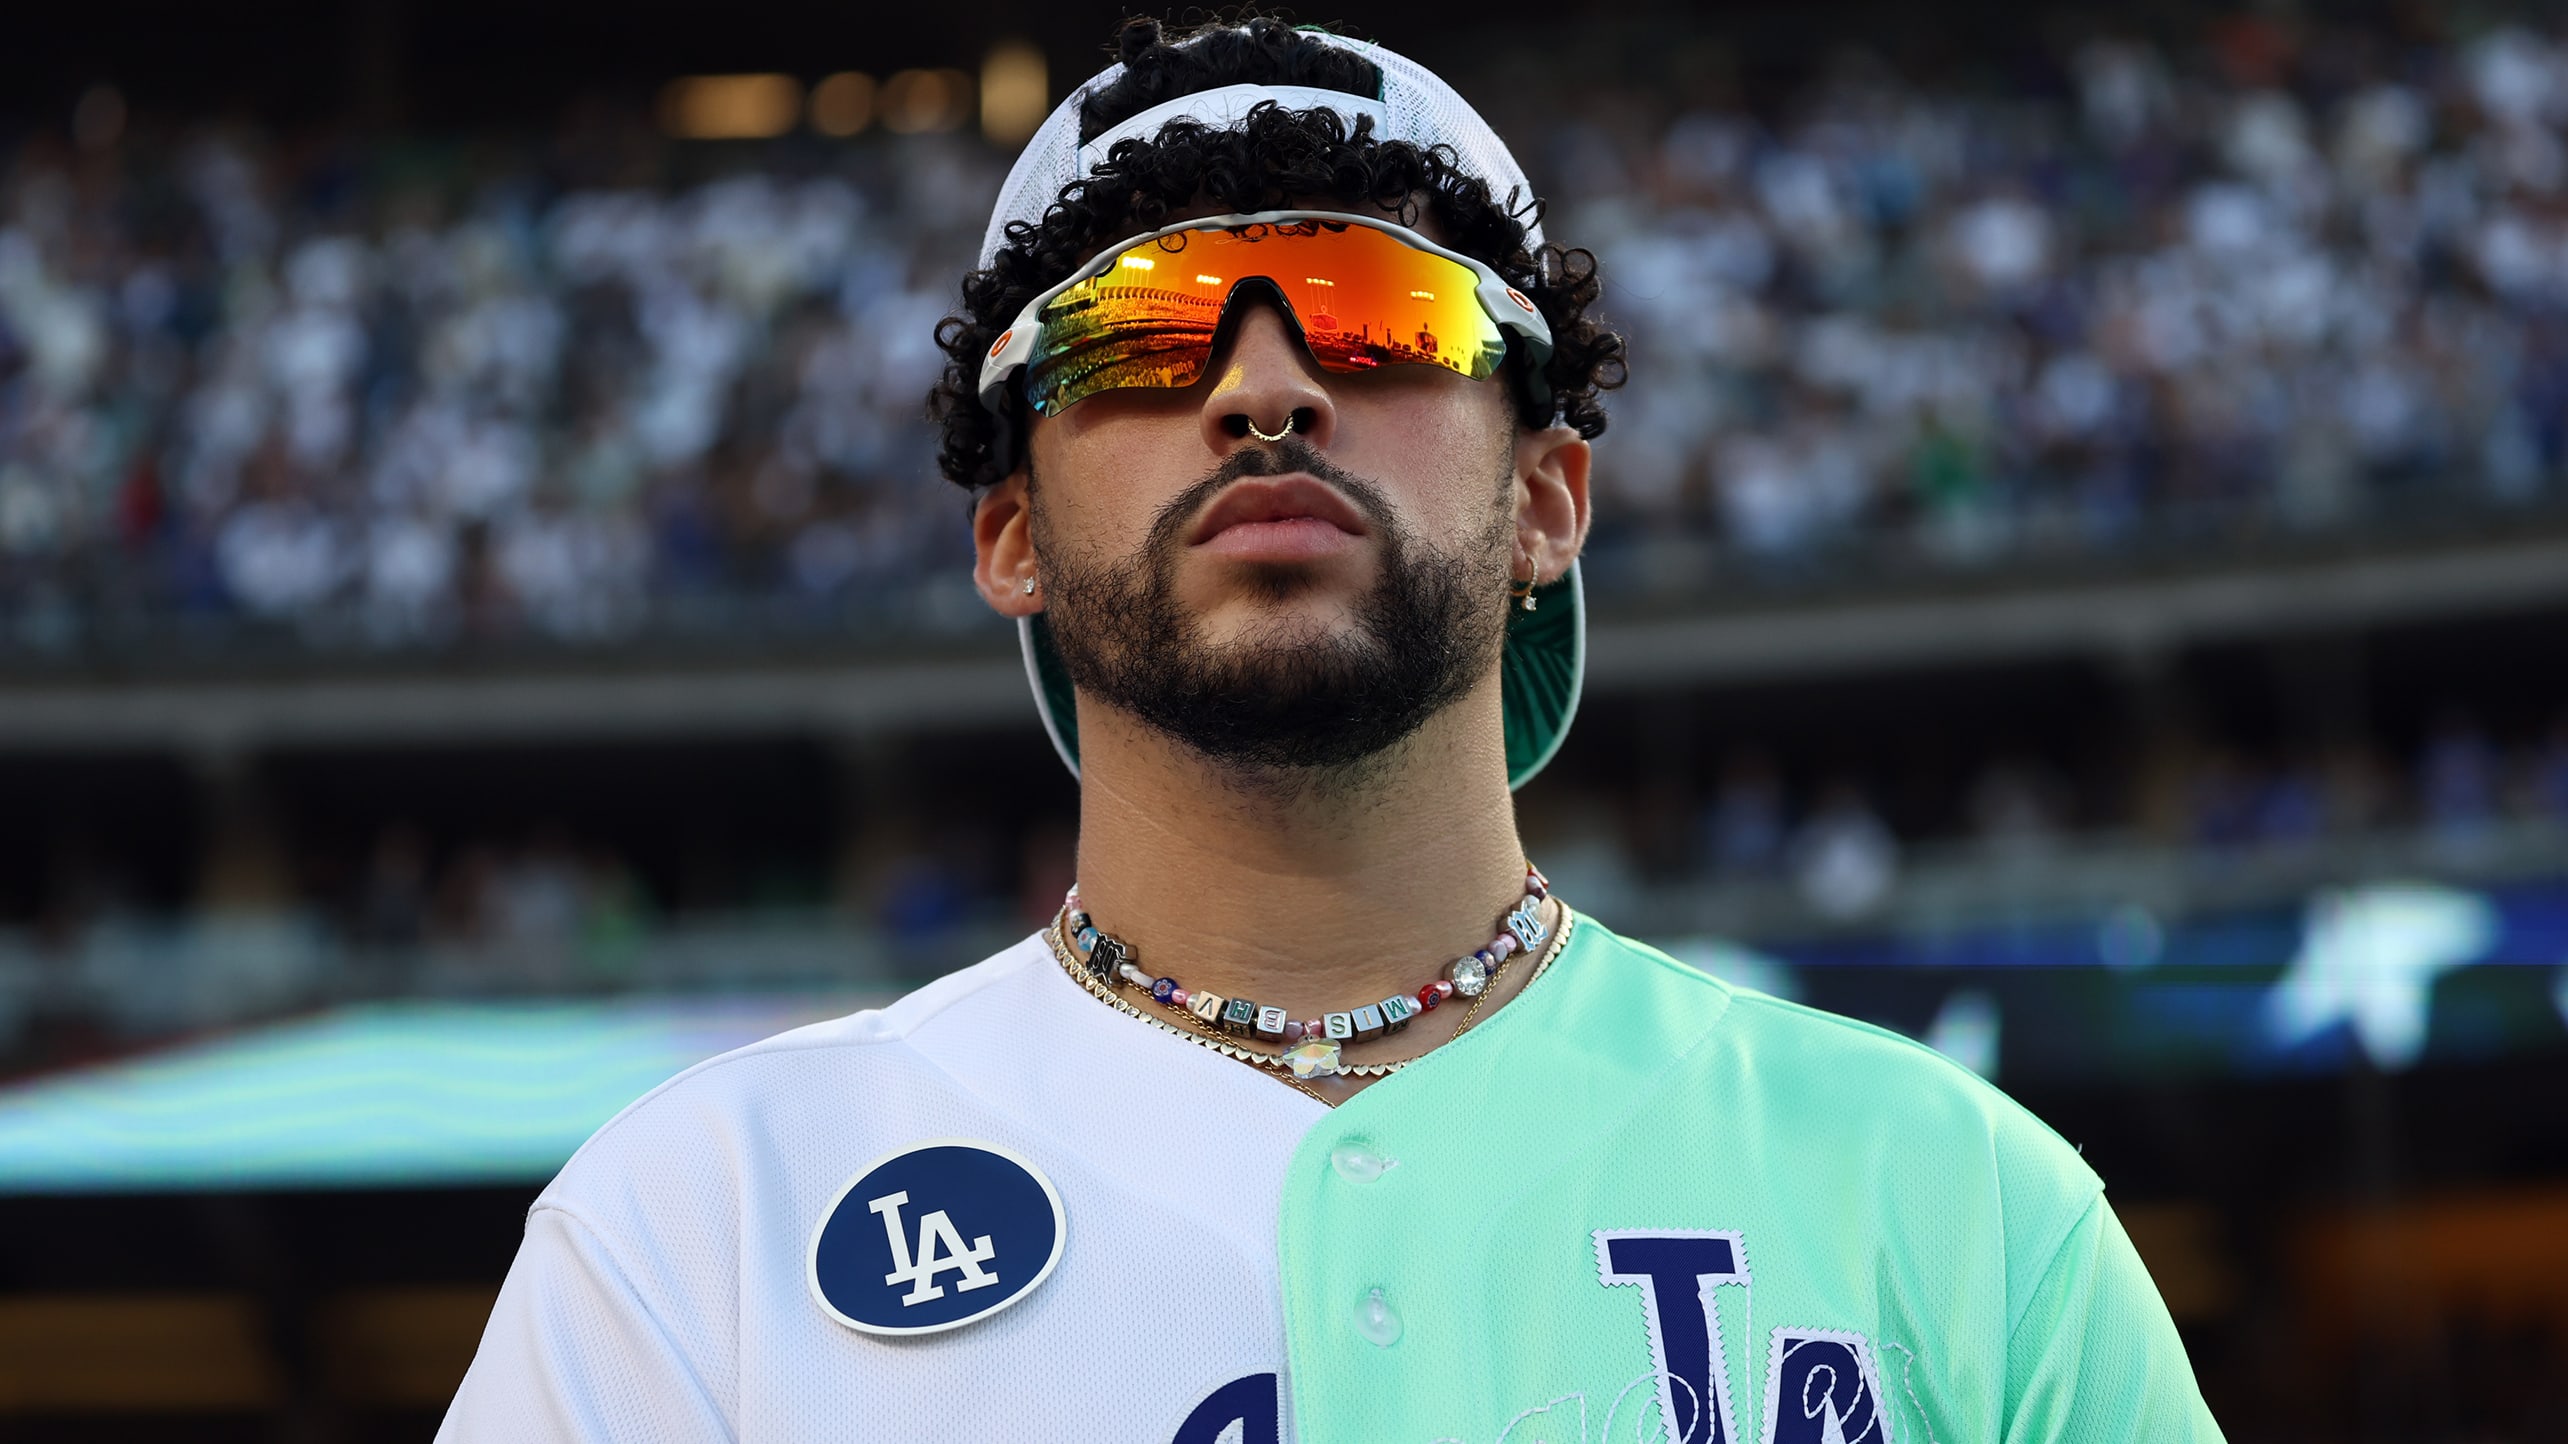 Musician Bad Bunny at an All-Star celebrity softball game